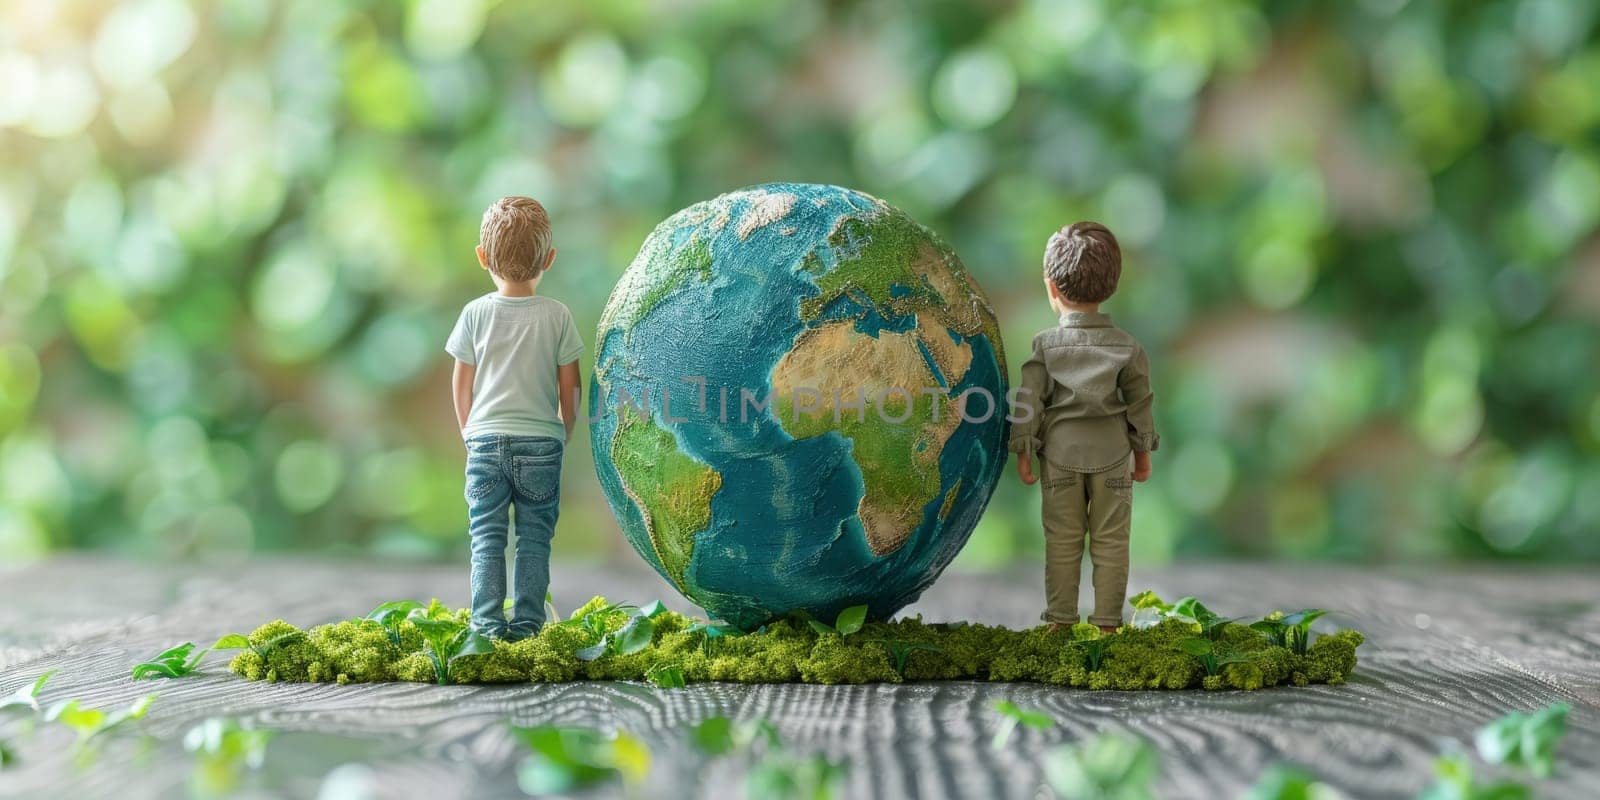 Children figurines standing beside large globe on tree stump. Concept of environmental awareness, sustainability, and protecting nature for future generations.